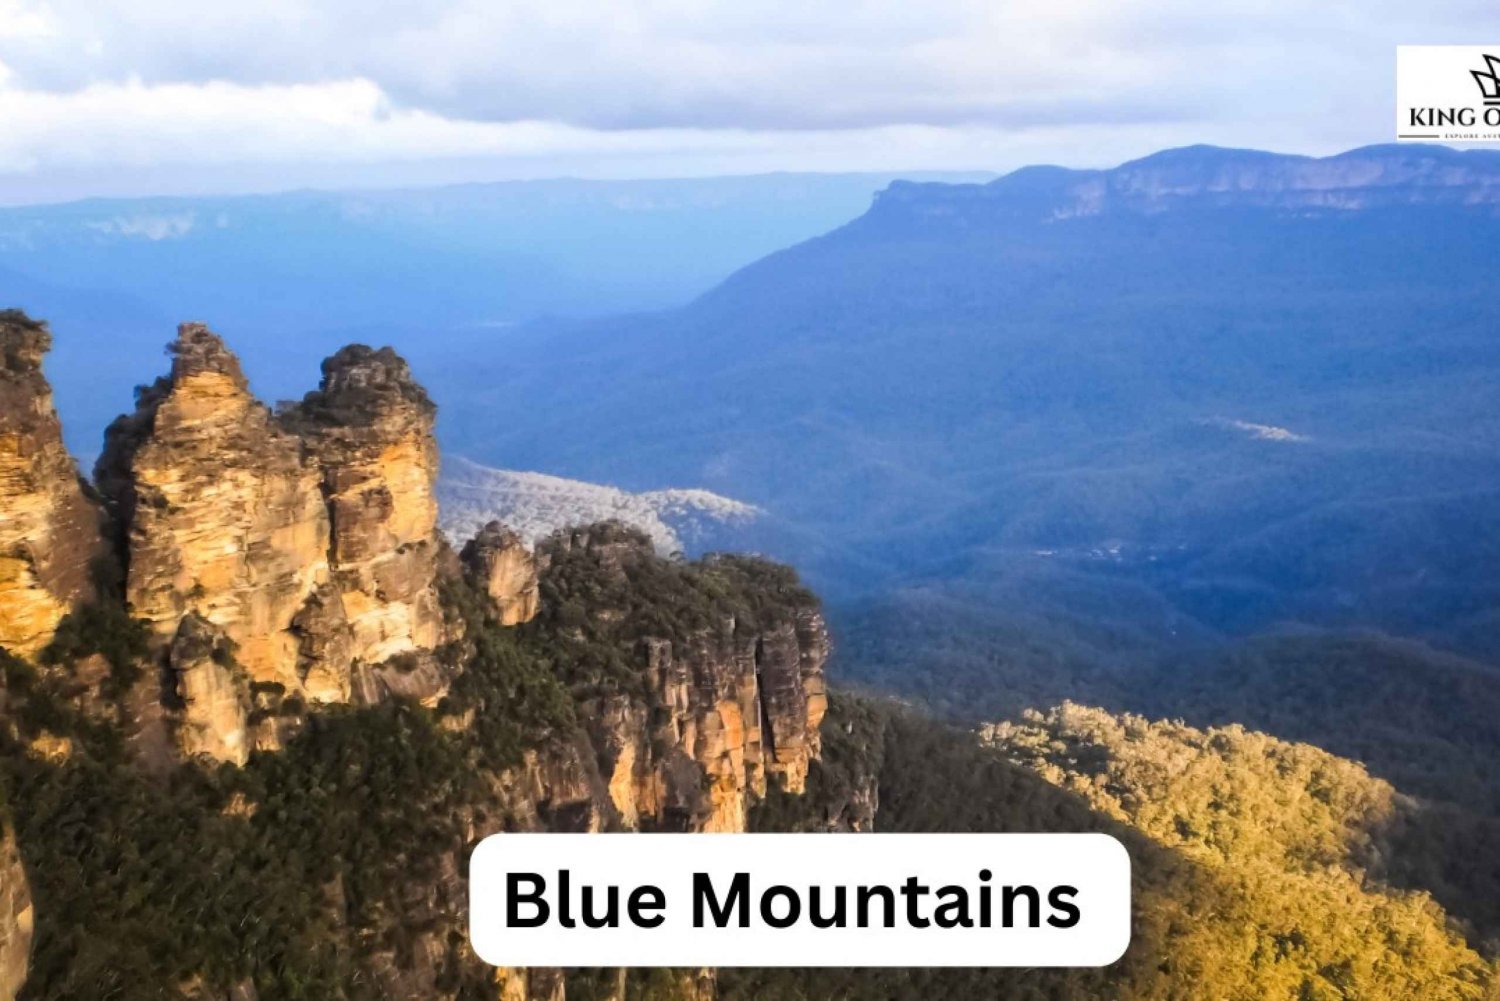 From Sydney: Private Tour For Small Groups To Blue Mountains